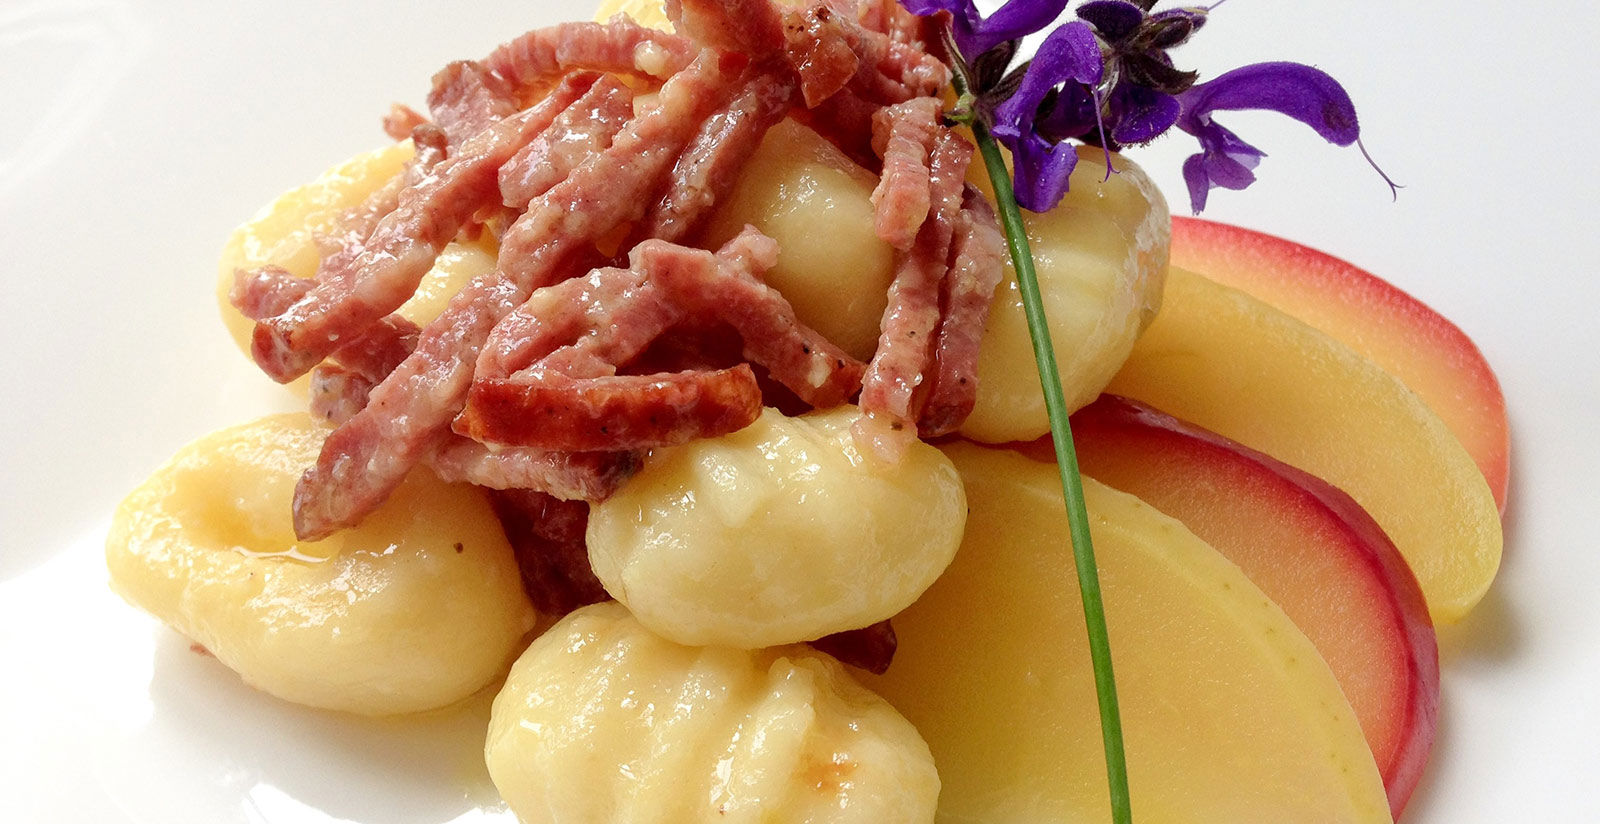 A craving for Trentino cuisine? We